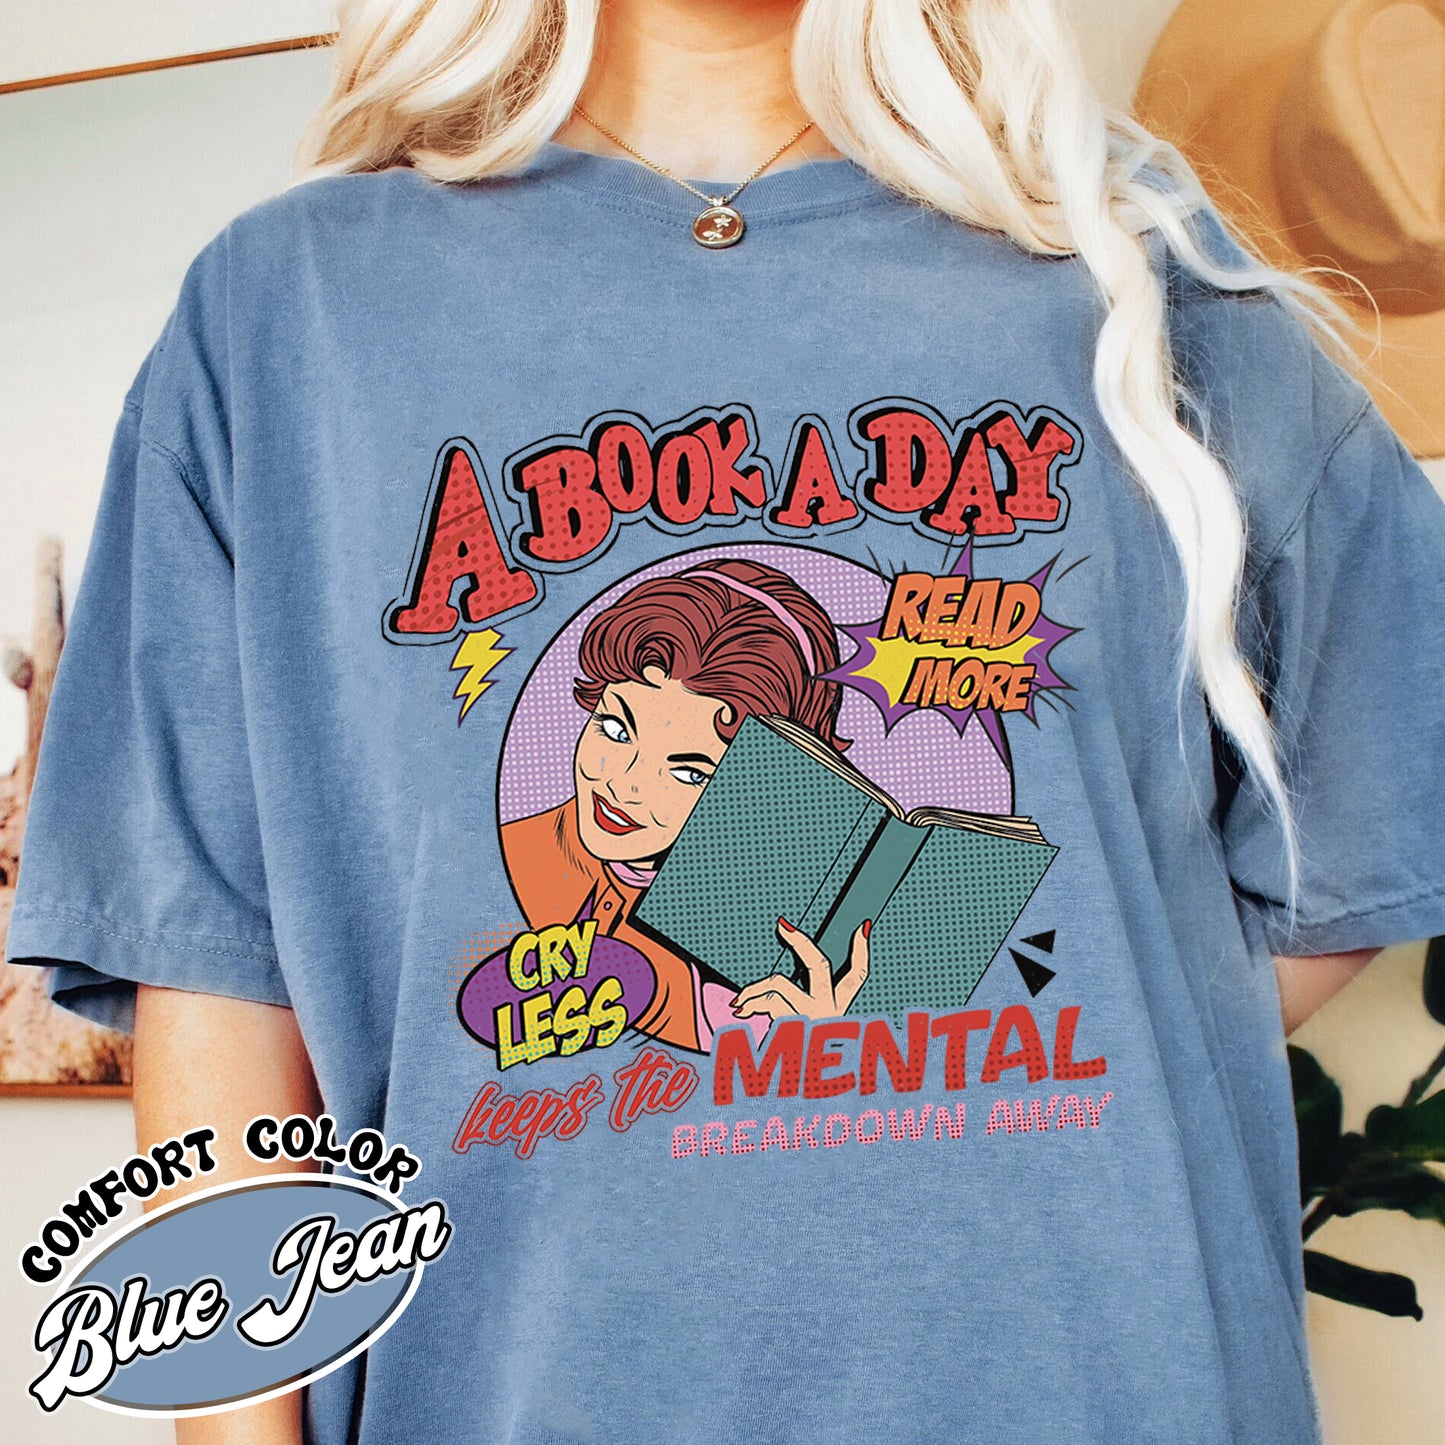 A Book a Day Keep the Mental Breakdown Away Comfort Color Shirt, Book Shirt, Book Gift, Book Lover Gift, a Book a Day Keep the Mental, Book Lover